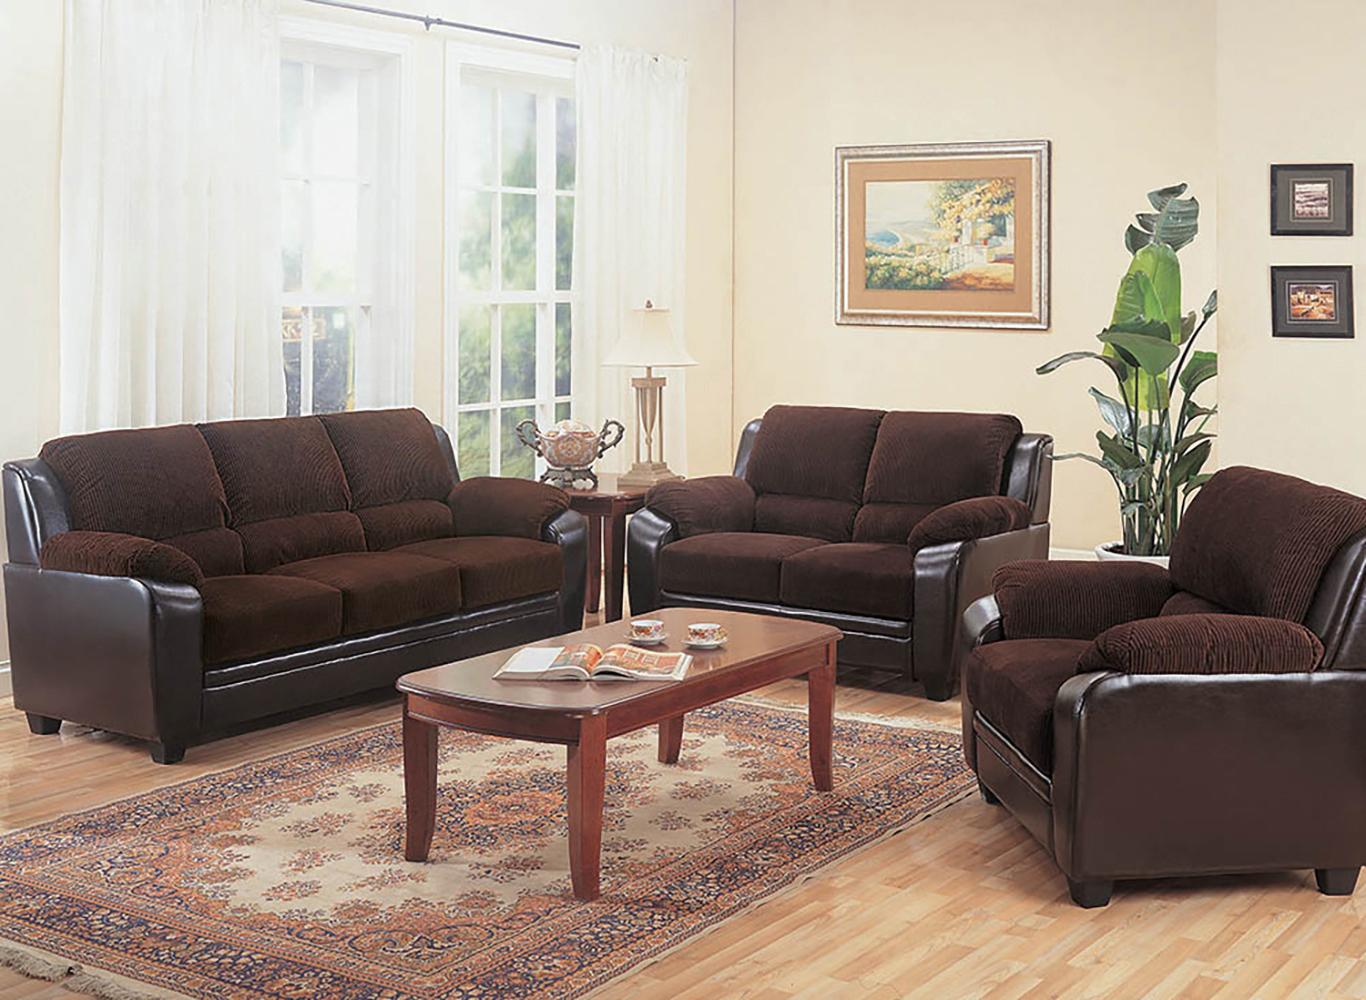 Contemporary Living Room Set 502811-S2 Monika 502811-S2 in Chocolate Leatherette